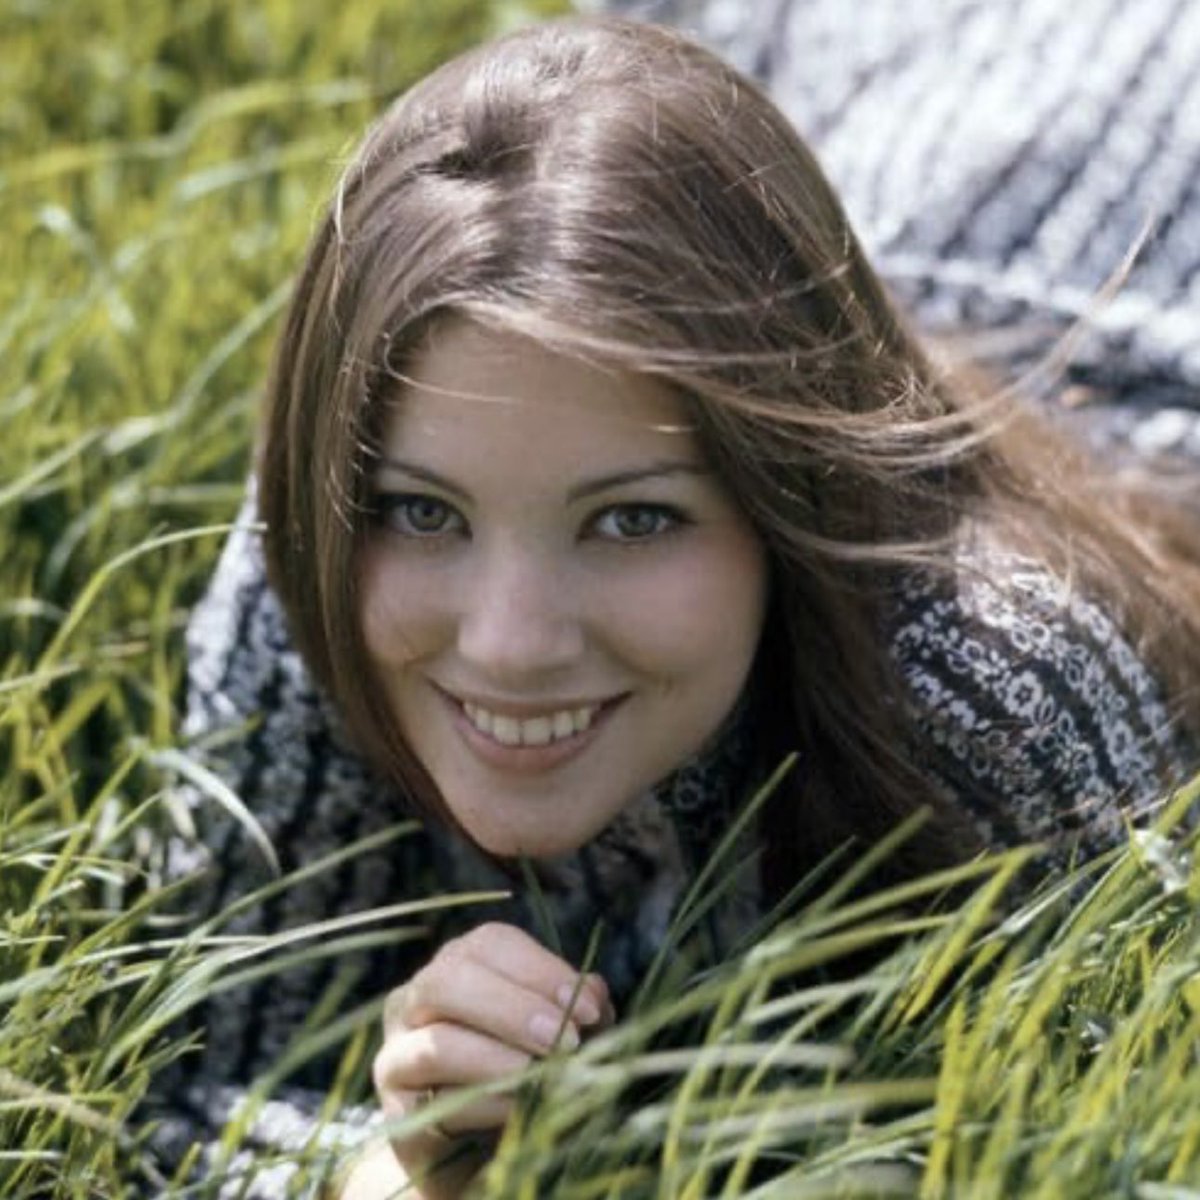 #HappyValentinesDay from the #LynneFrederickFanPage
#LynneFrederick circa 1972
📷Photo by #TerryFincher
•
{#EnglishRose} {#beautifulwoman} {#movie} {#actress} {#longhairdontcare} {#beautifulsmile} {#popculture} {#britishculture} {#mostbeautifulgirlintheworld} {#angelface}